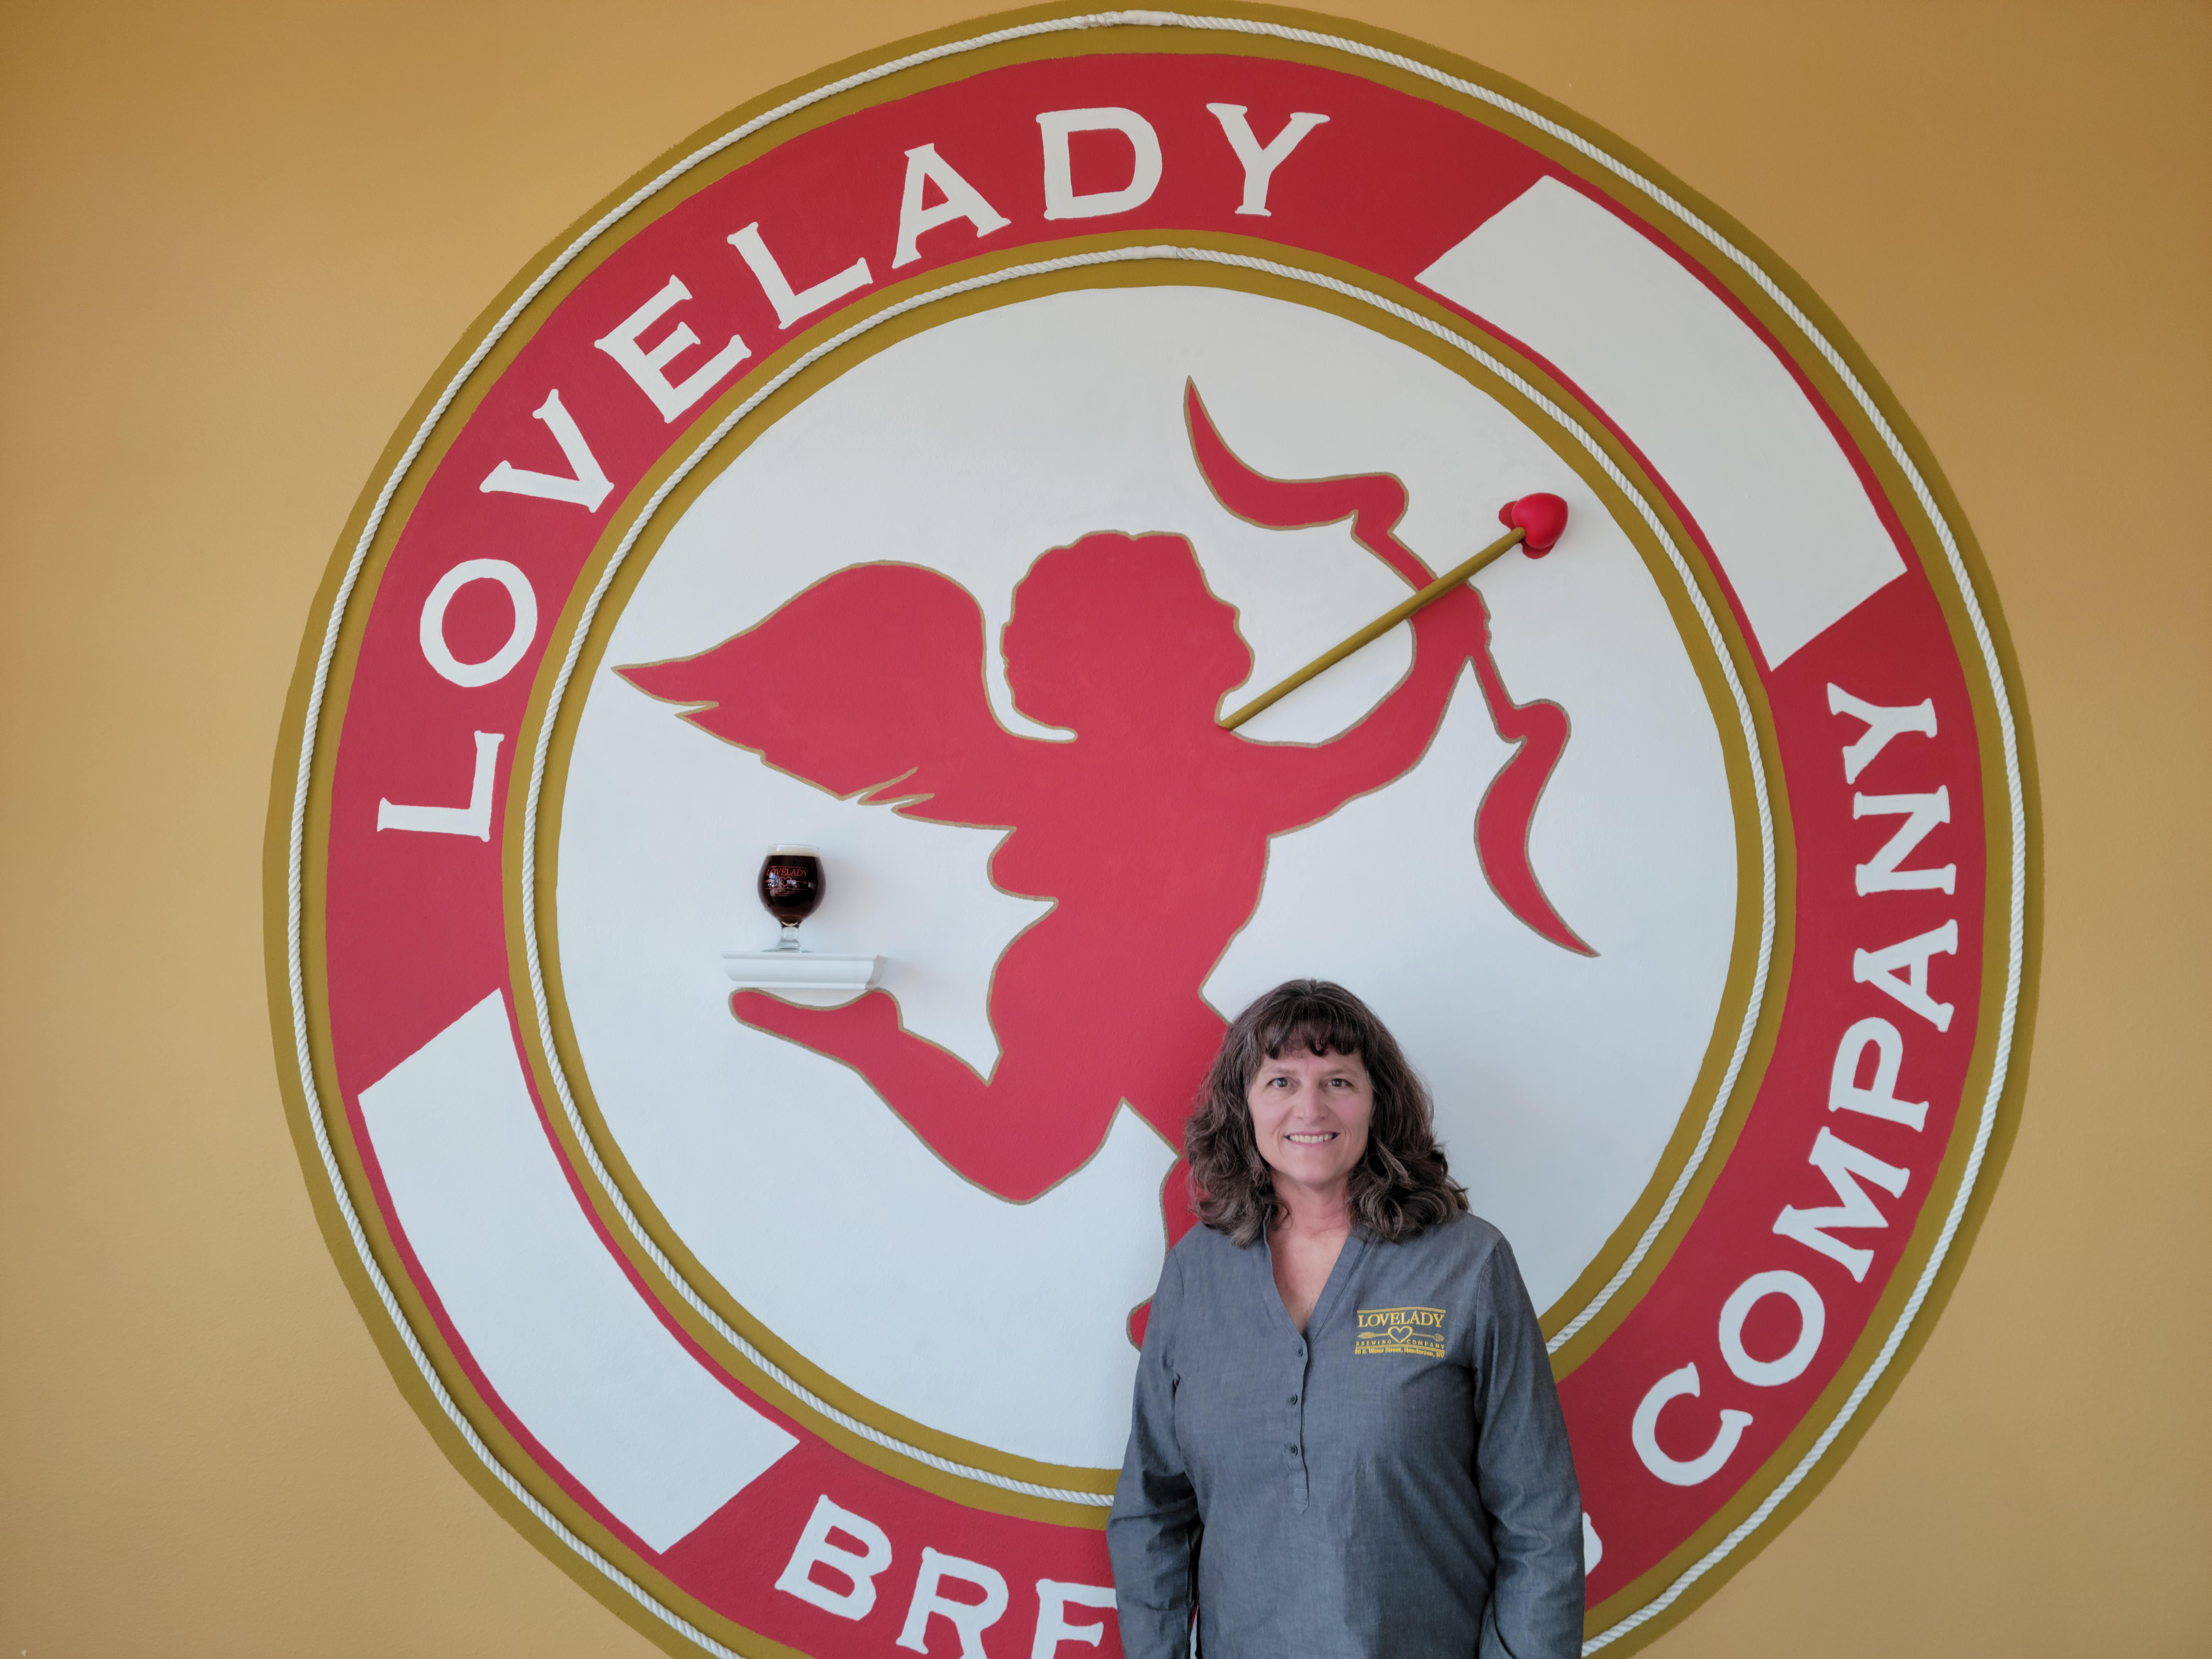 Linda Lovelady of Lovelady Brewing Company in Henderson posing in front of the logo